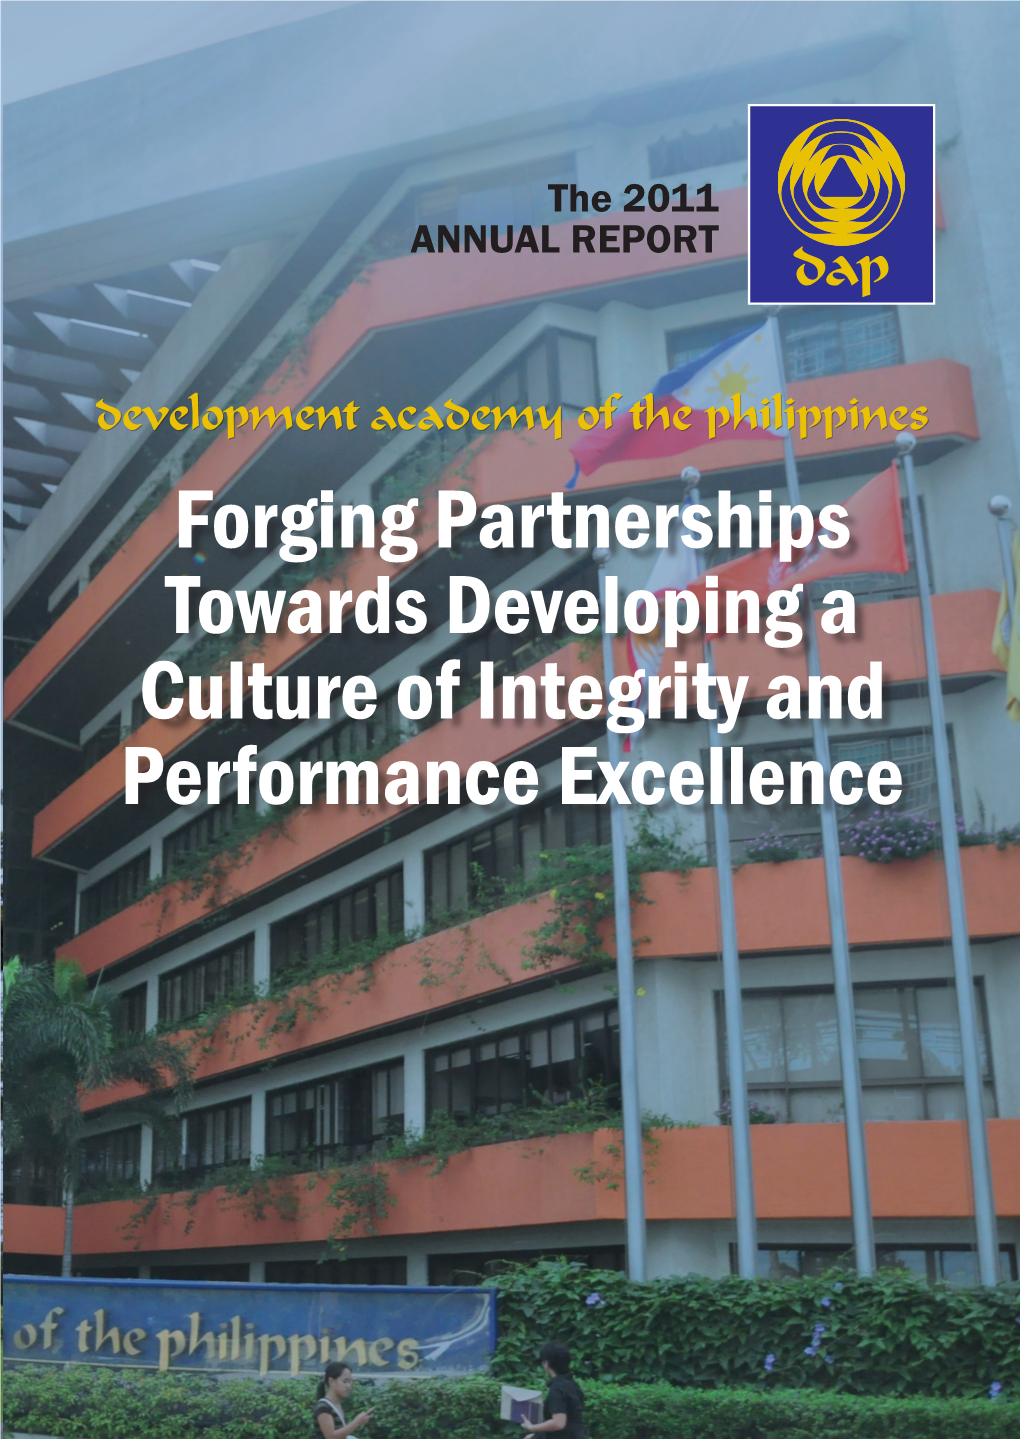 2011 Annual Report Development Academy of the Philippines Forging Partnerships Towards Developing a Culture of Integrity and Performance Excellence PUBLICATIONS TEAM